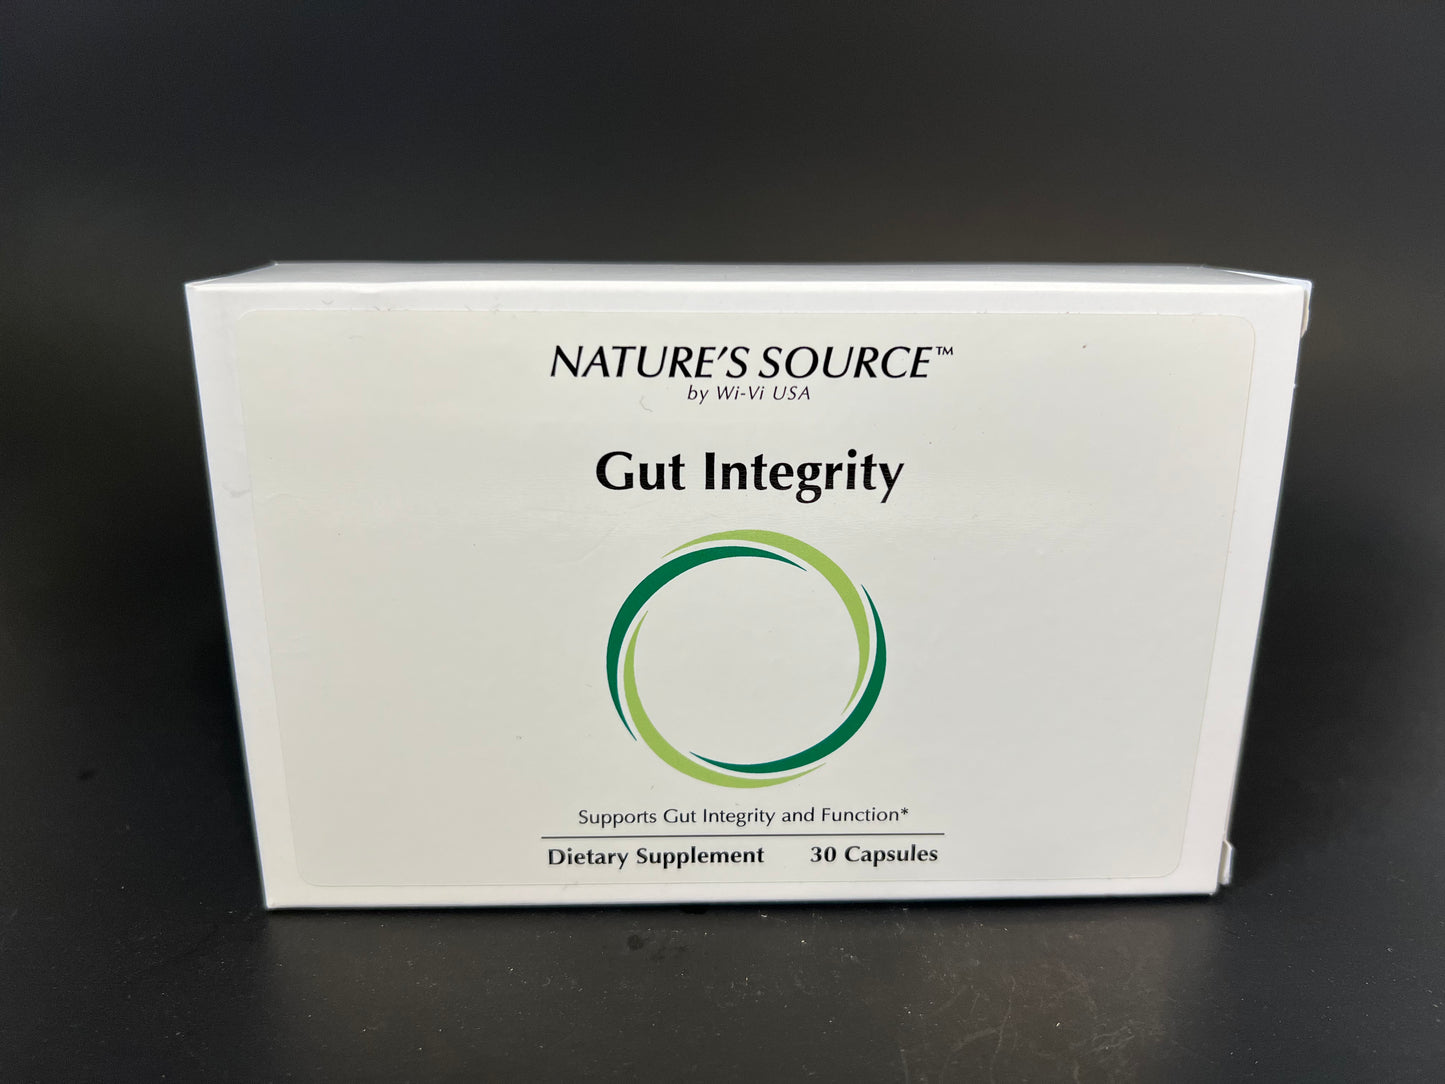 Gut Integrity - Gut Integrity and Function Support by: Nature's Source